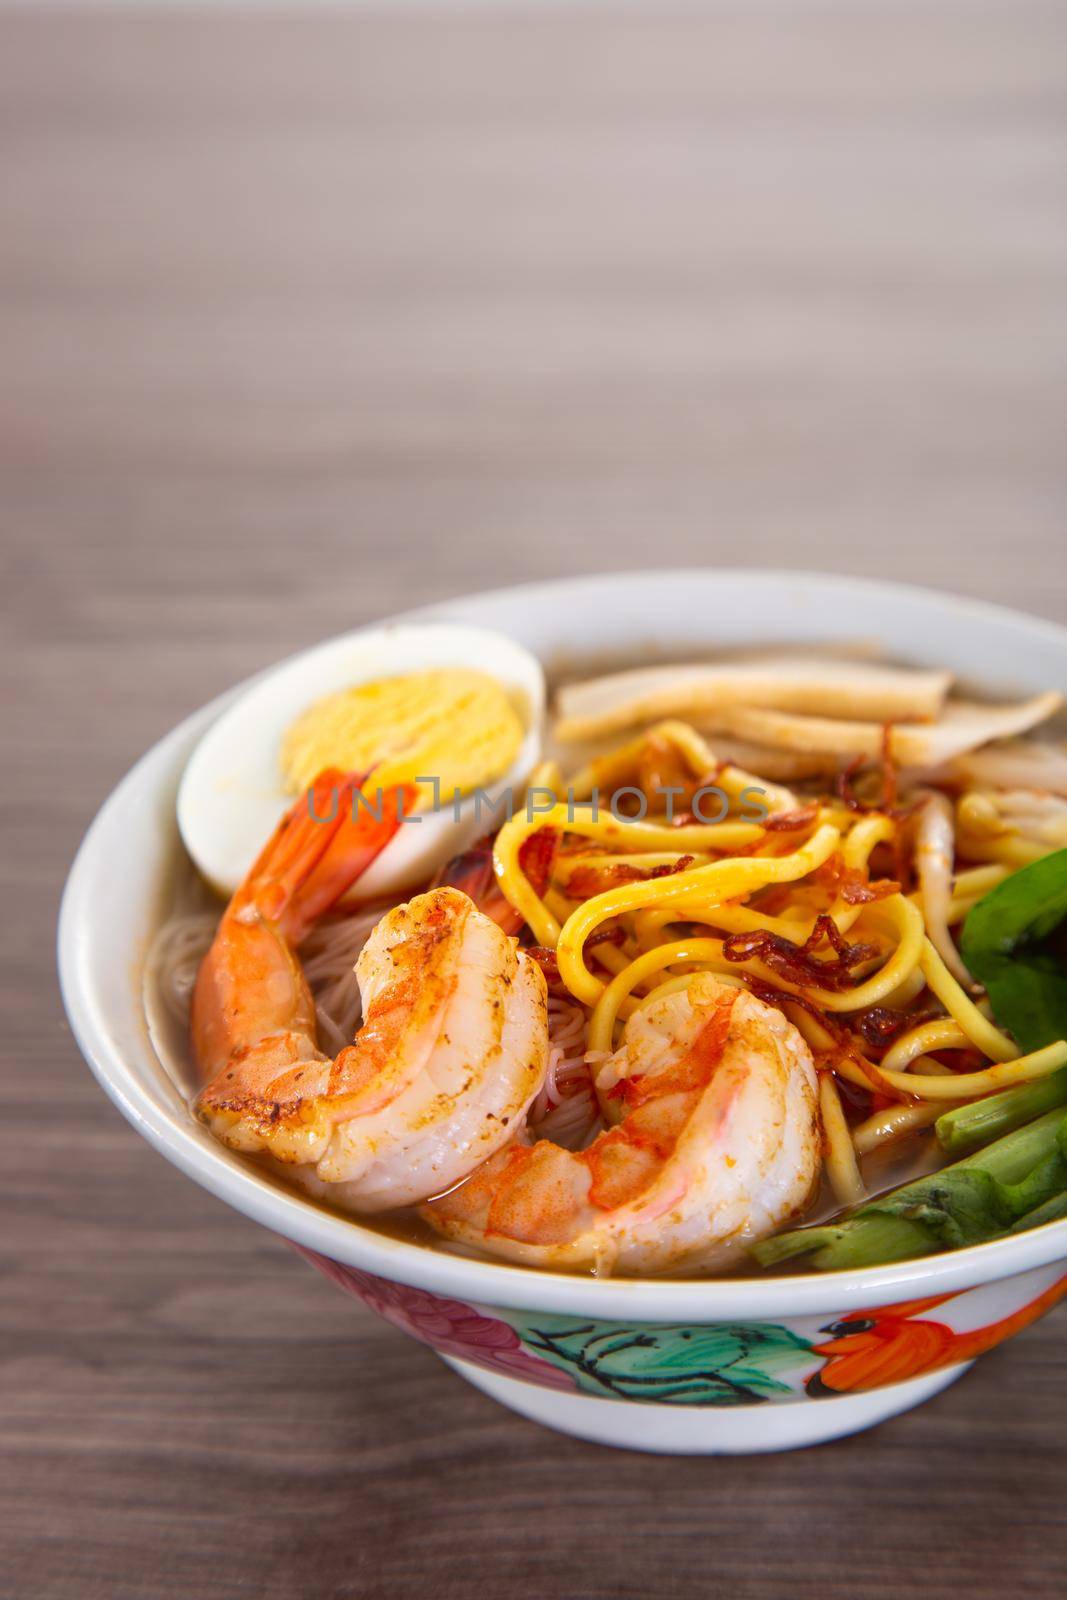 Spicy Prawn Noodle. A delicacy made popular by the Chinese in Malaysia and Singapore by tehcheesiong